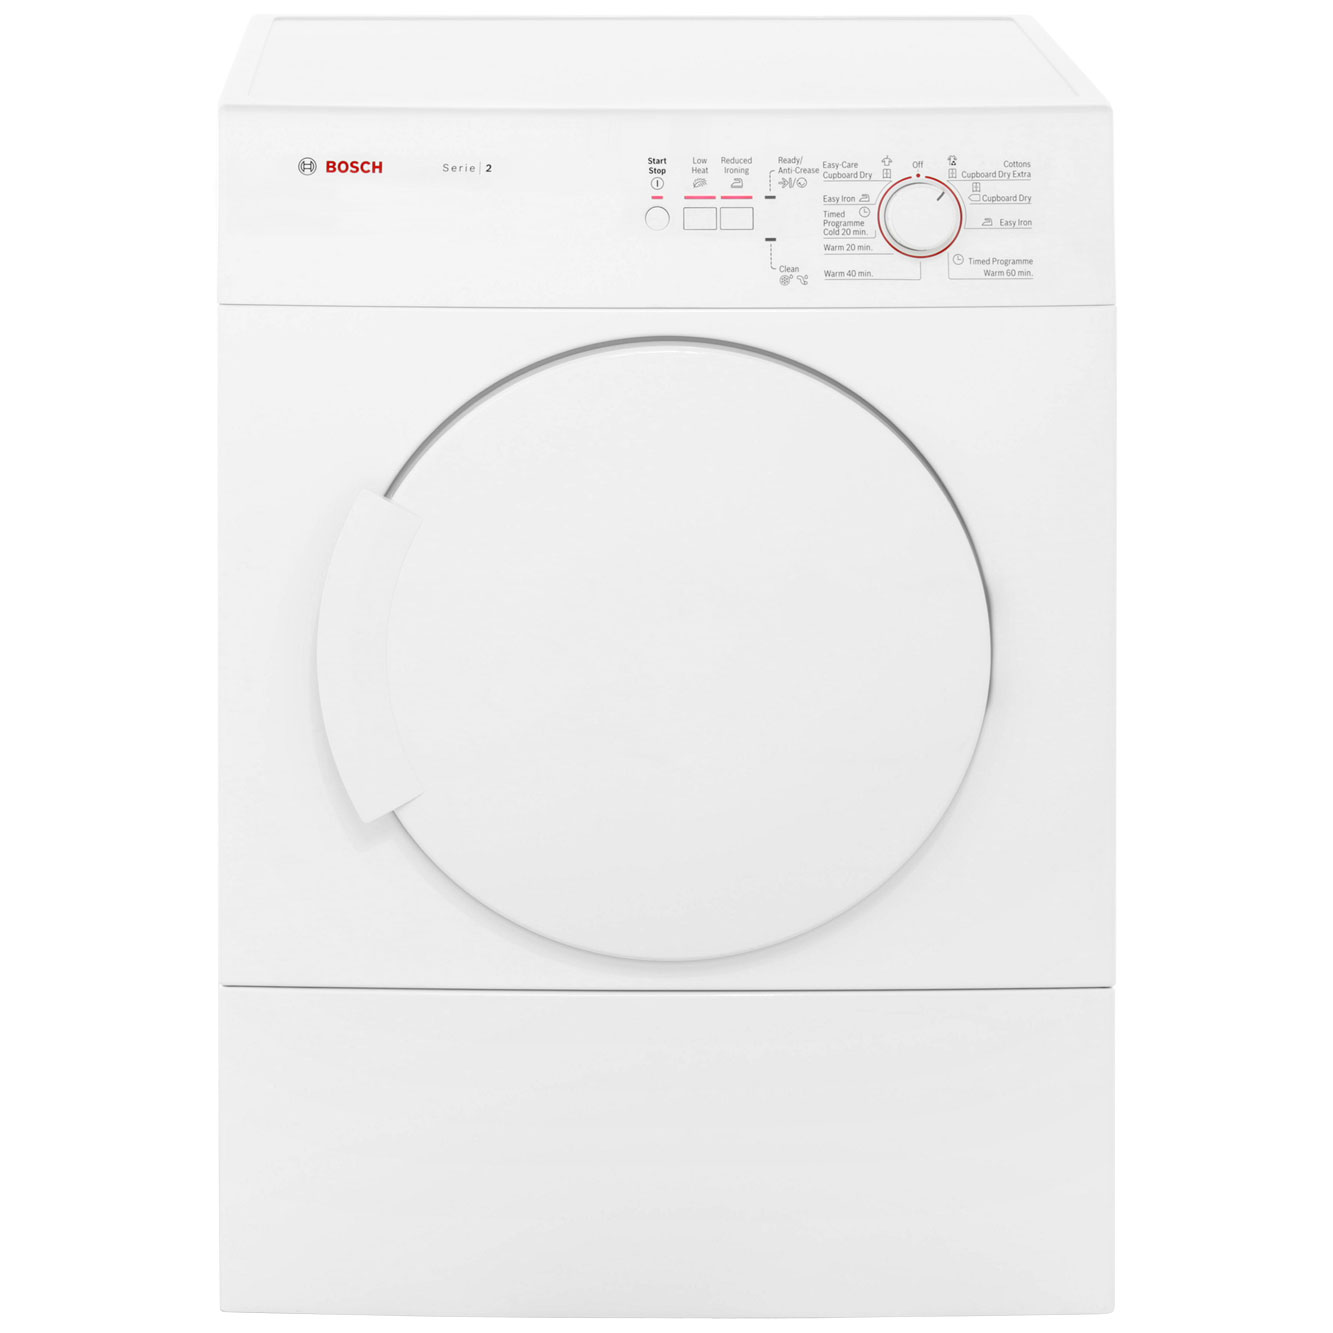 Bosch WTA74100GB Free Standing Vented Tumble Dryer in White